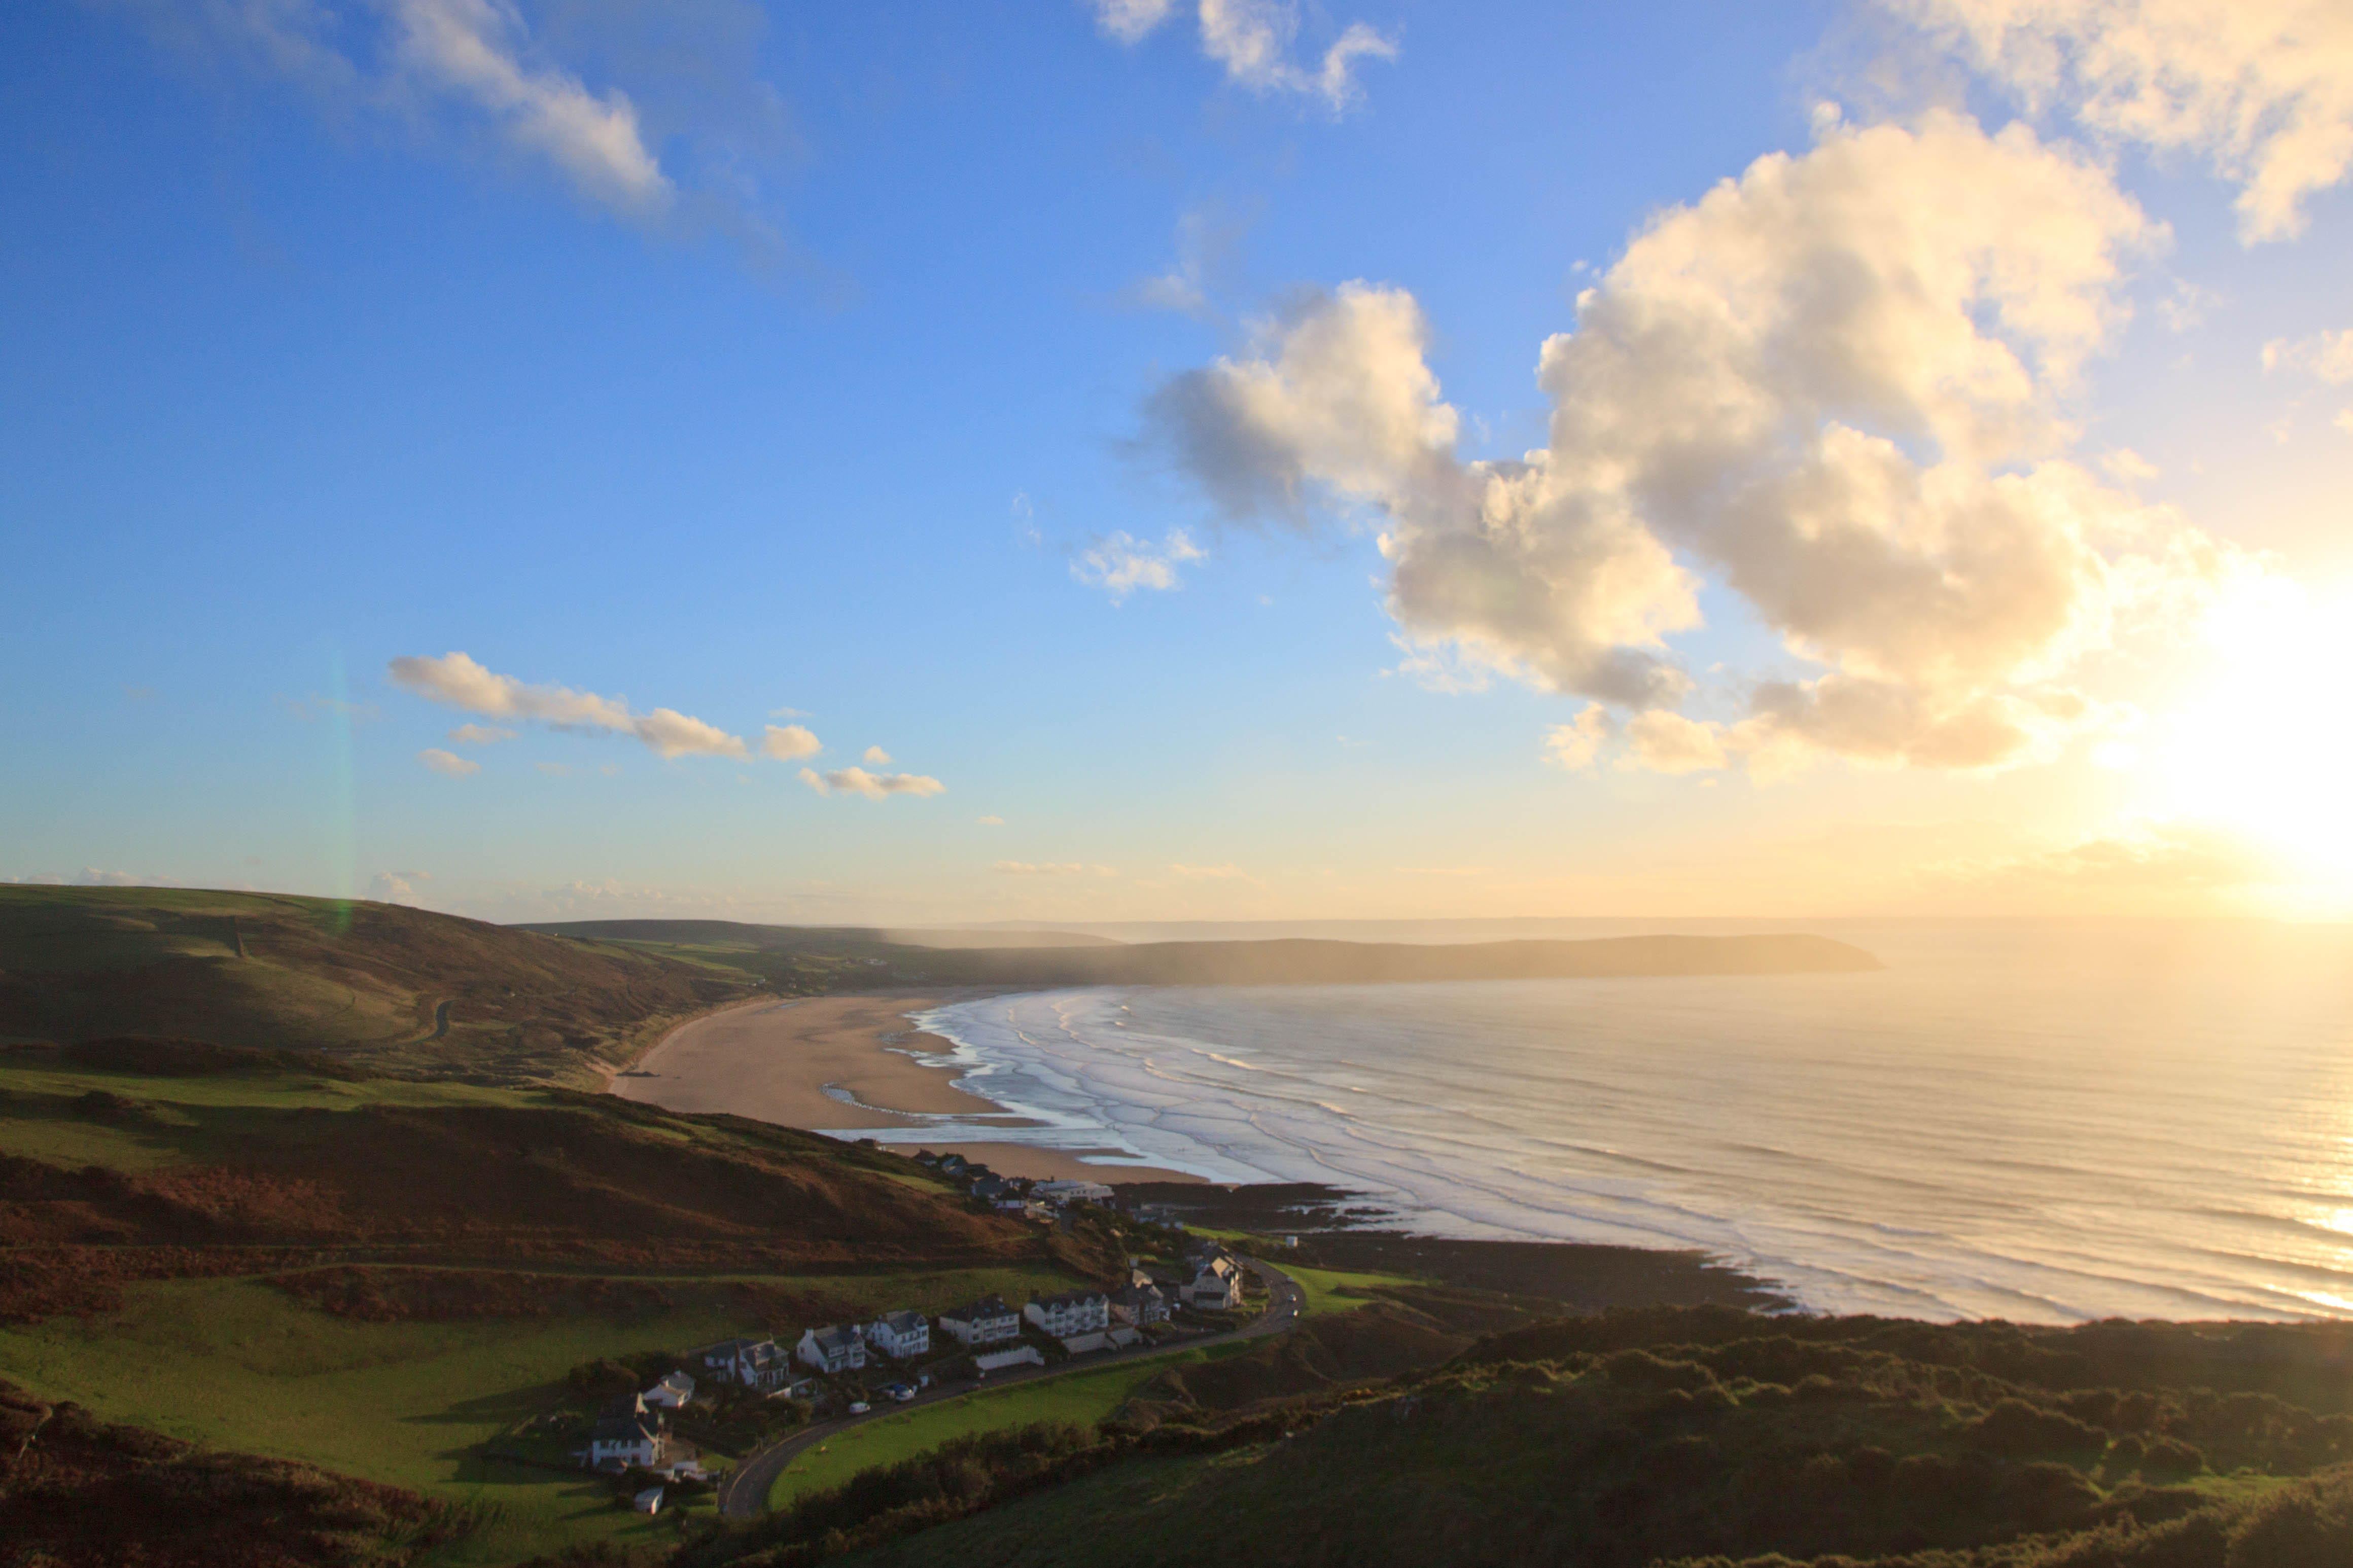 Woolacombe Beach and Baggy Point from Quarry Hill near Mortehoe